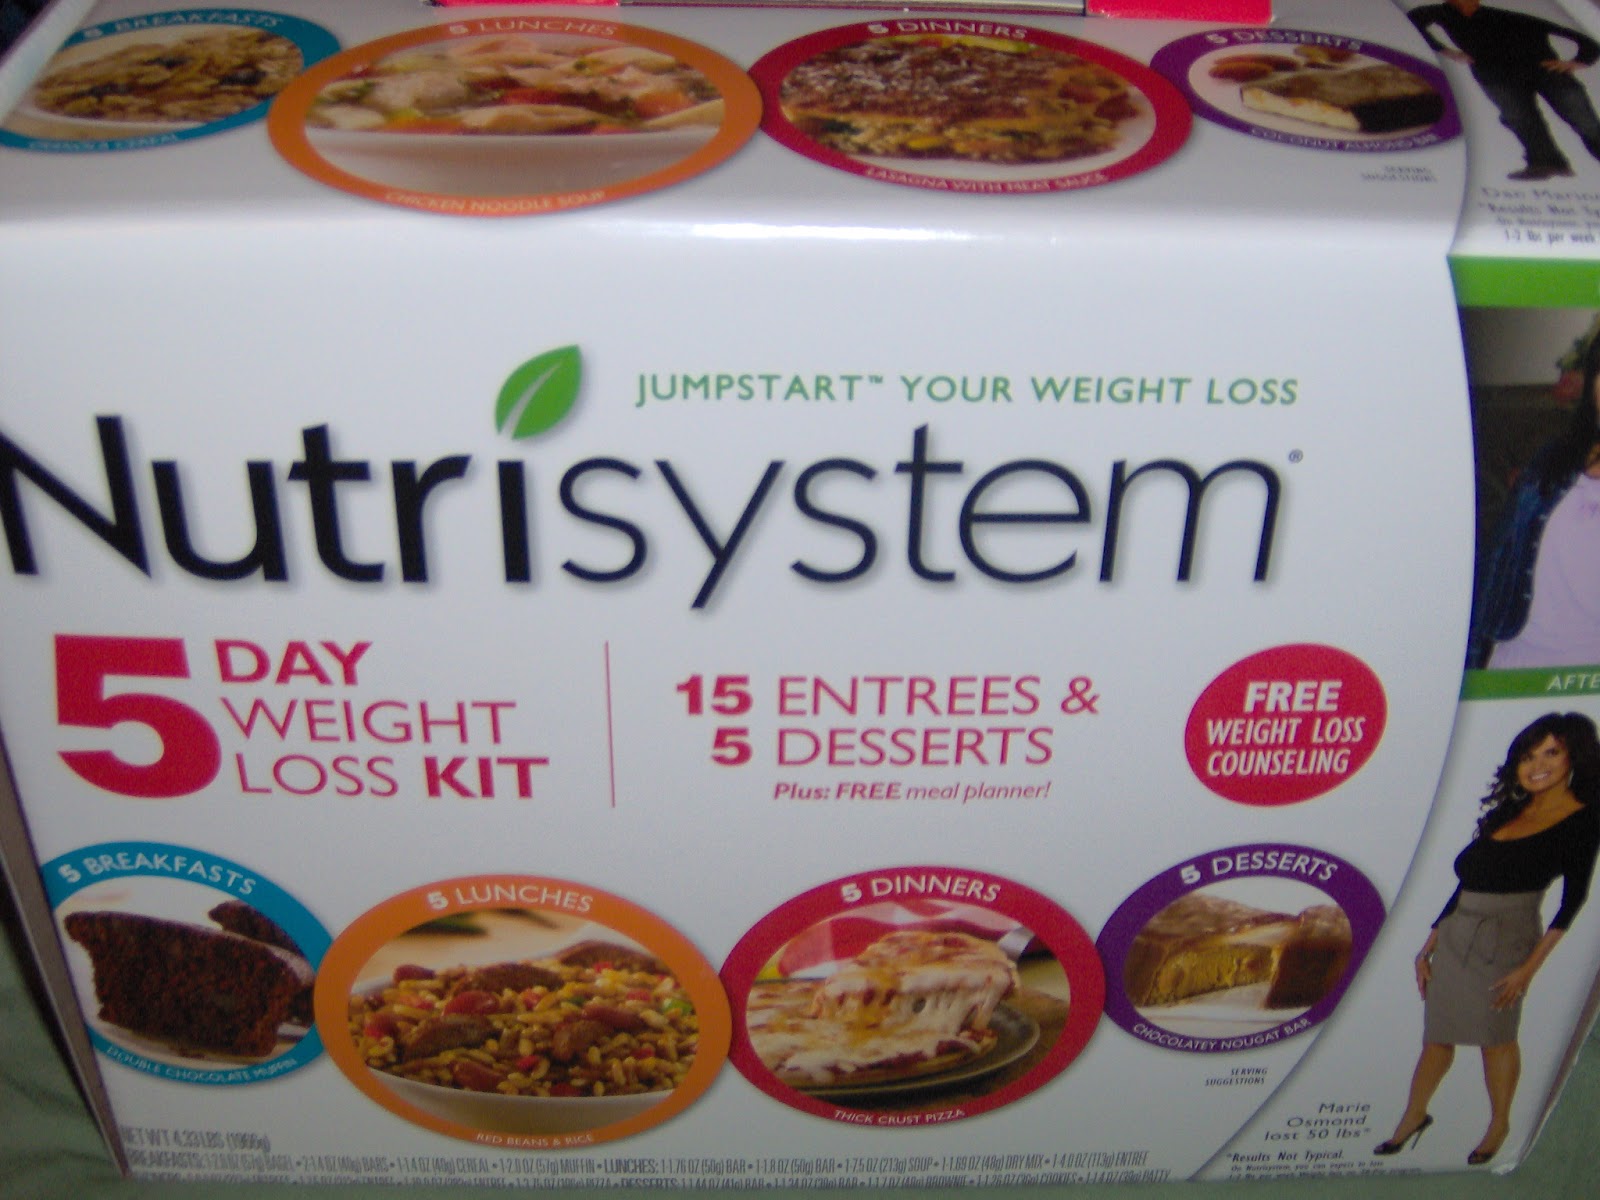 A Nutrisystem for men offers satisfactory results